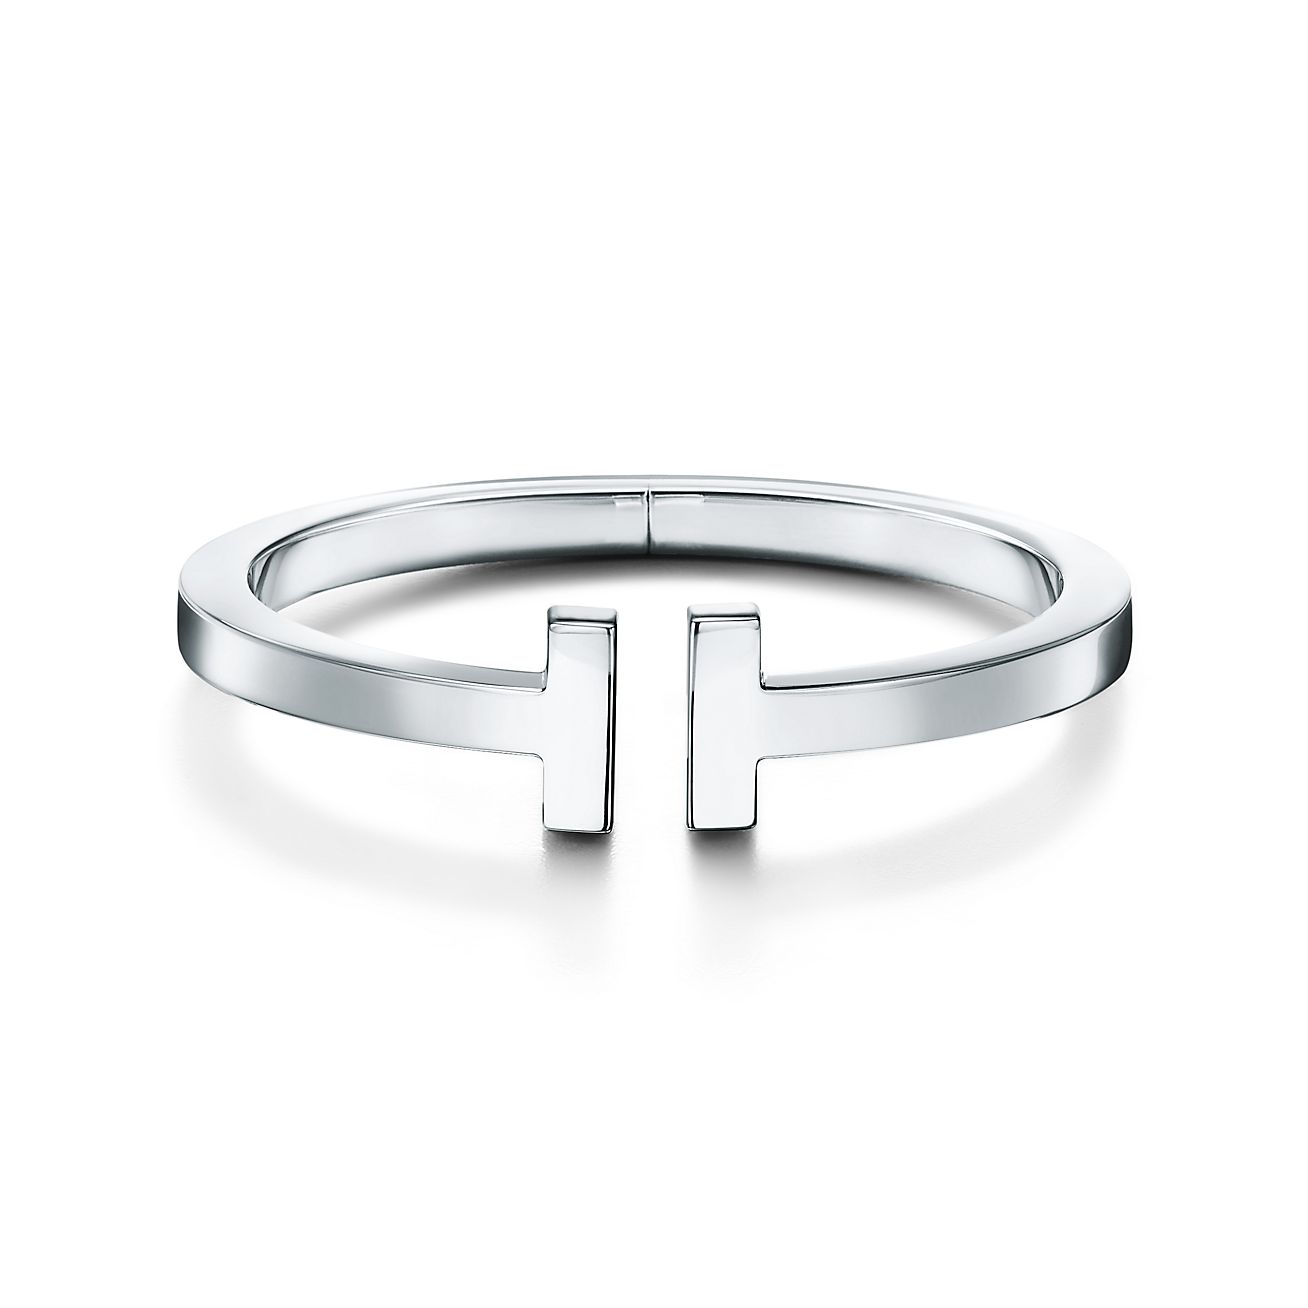 Tiffany T square bracelet in sterling silver, small. | Tiffany & Co.